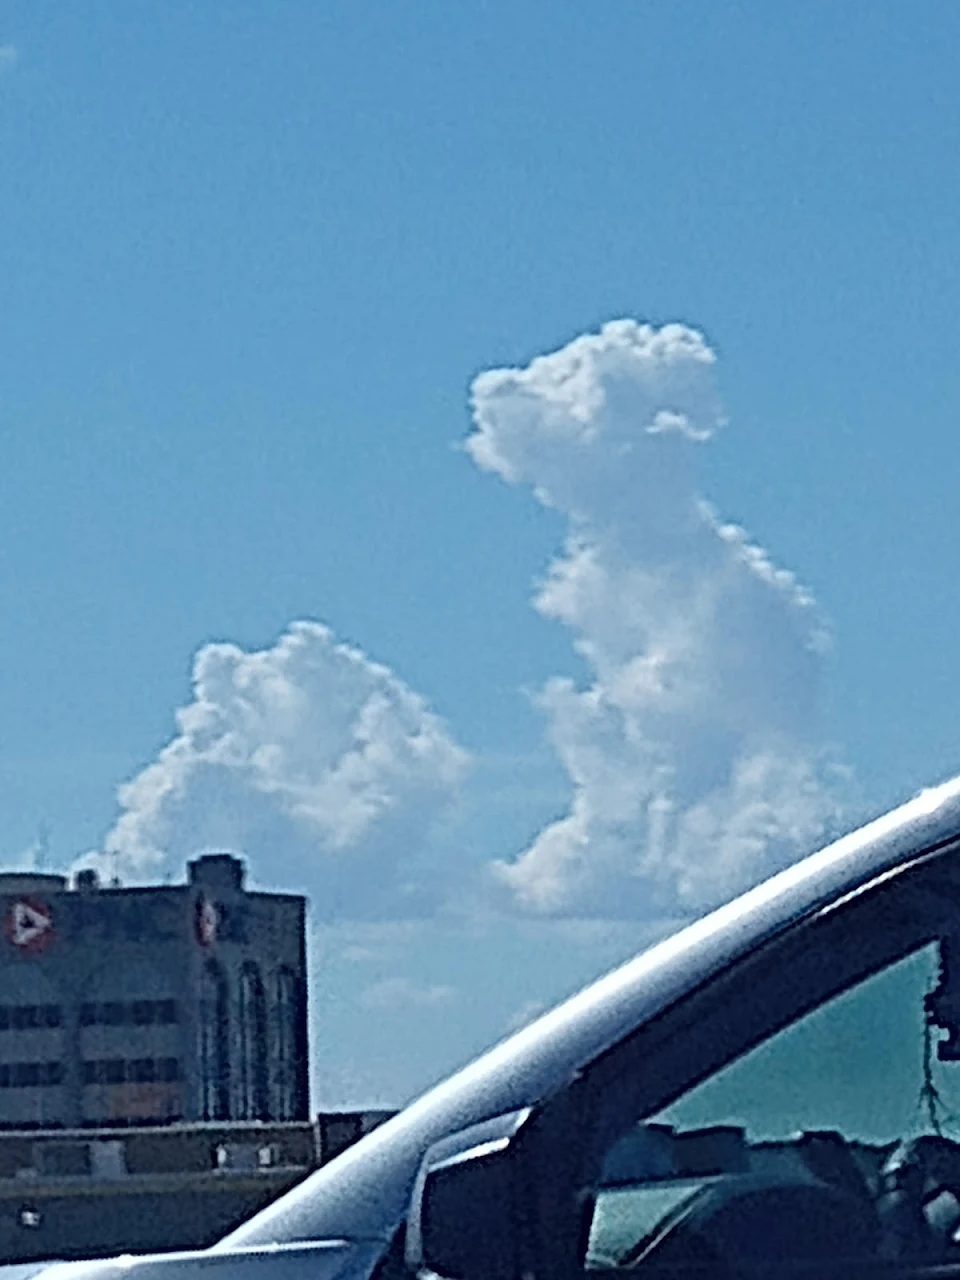 this cloud i found in the shape of a dog